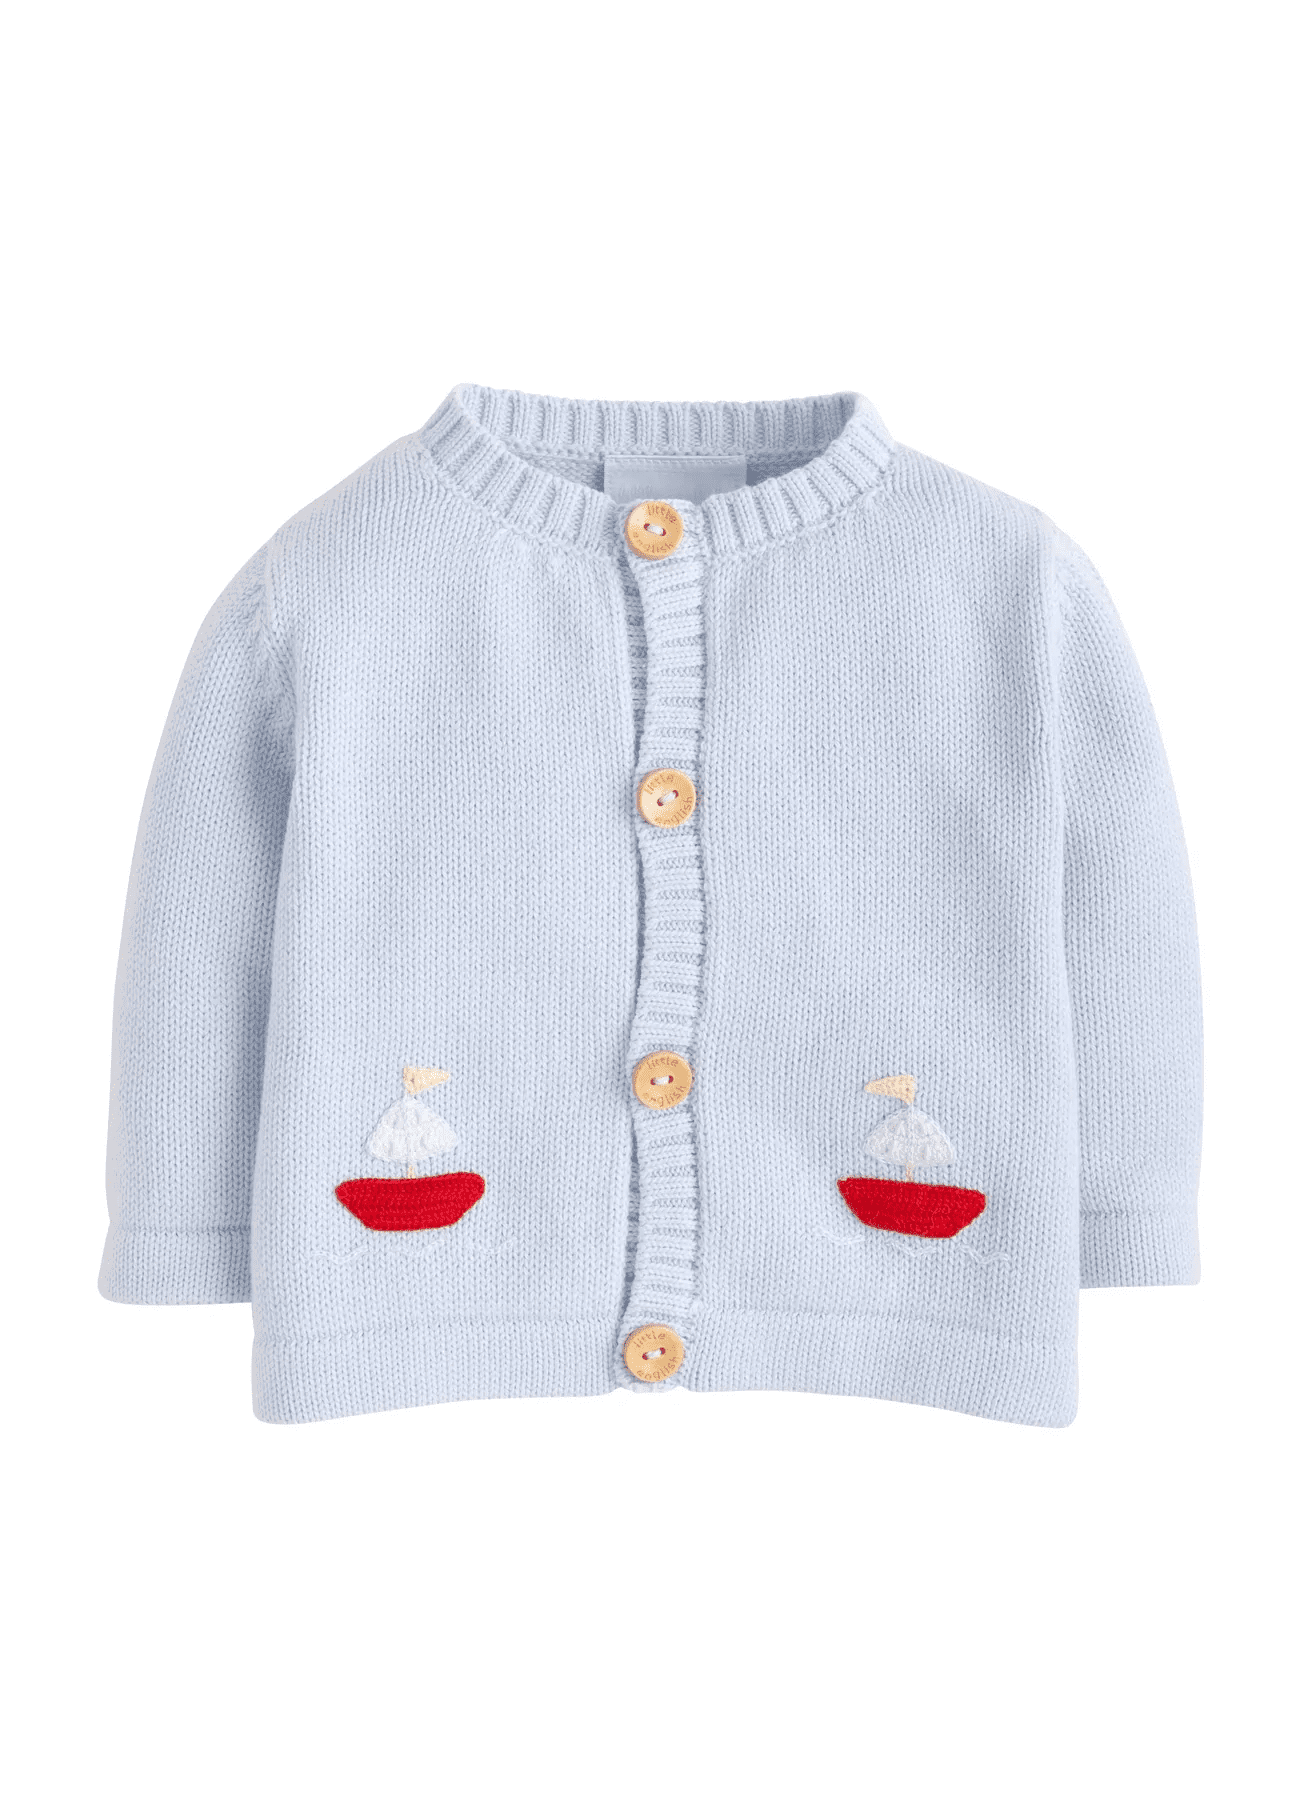 Boys Sailboat Sweater from Little English